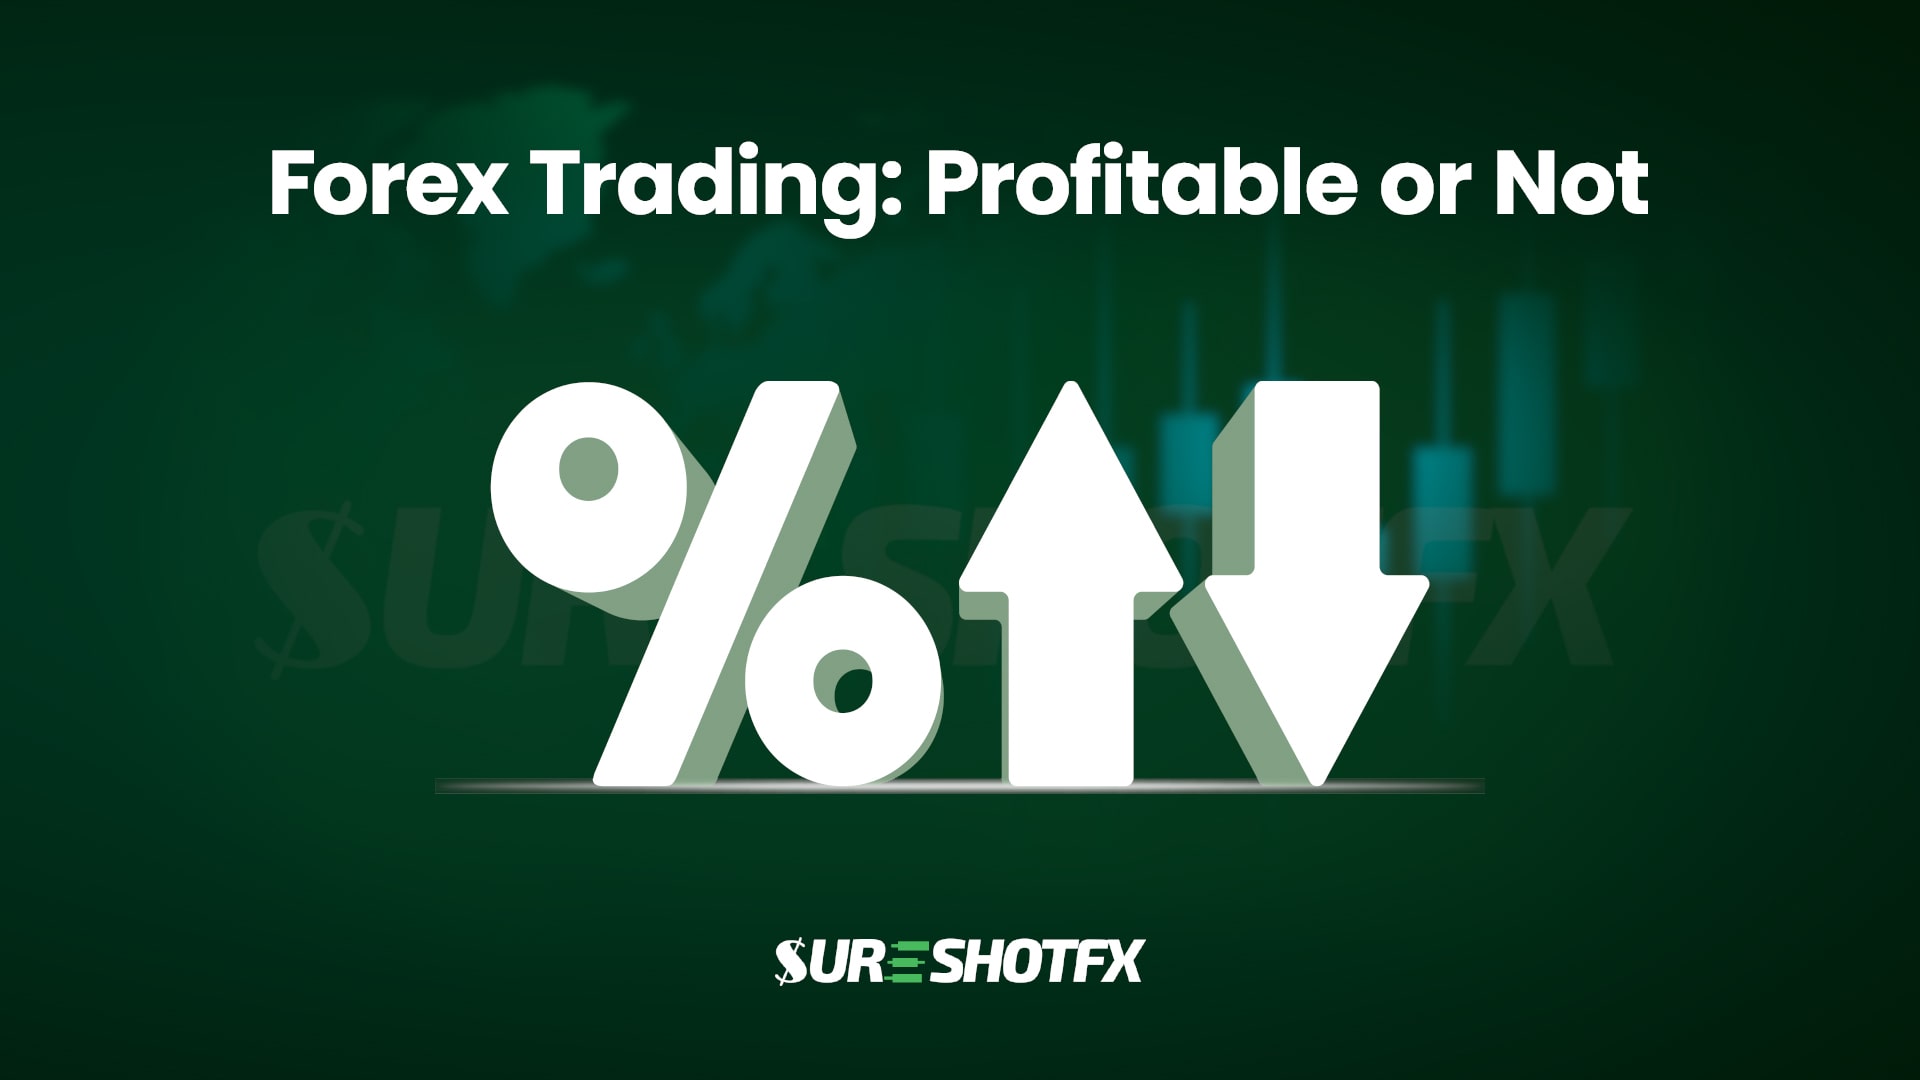 percentage and up-down symbol essentially depict forex trading profitable or not.